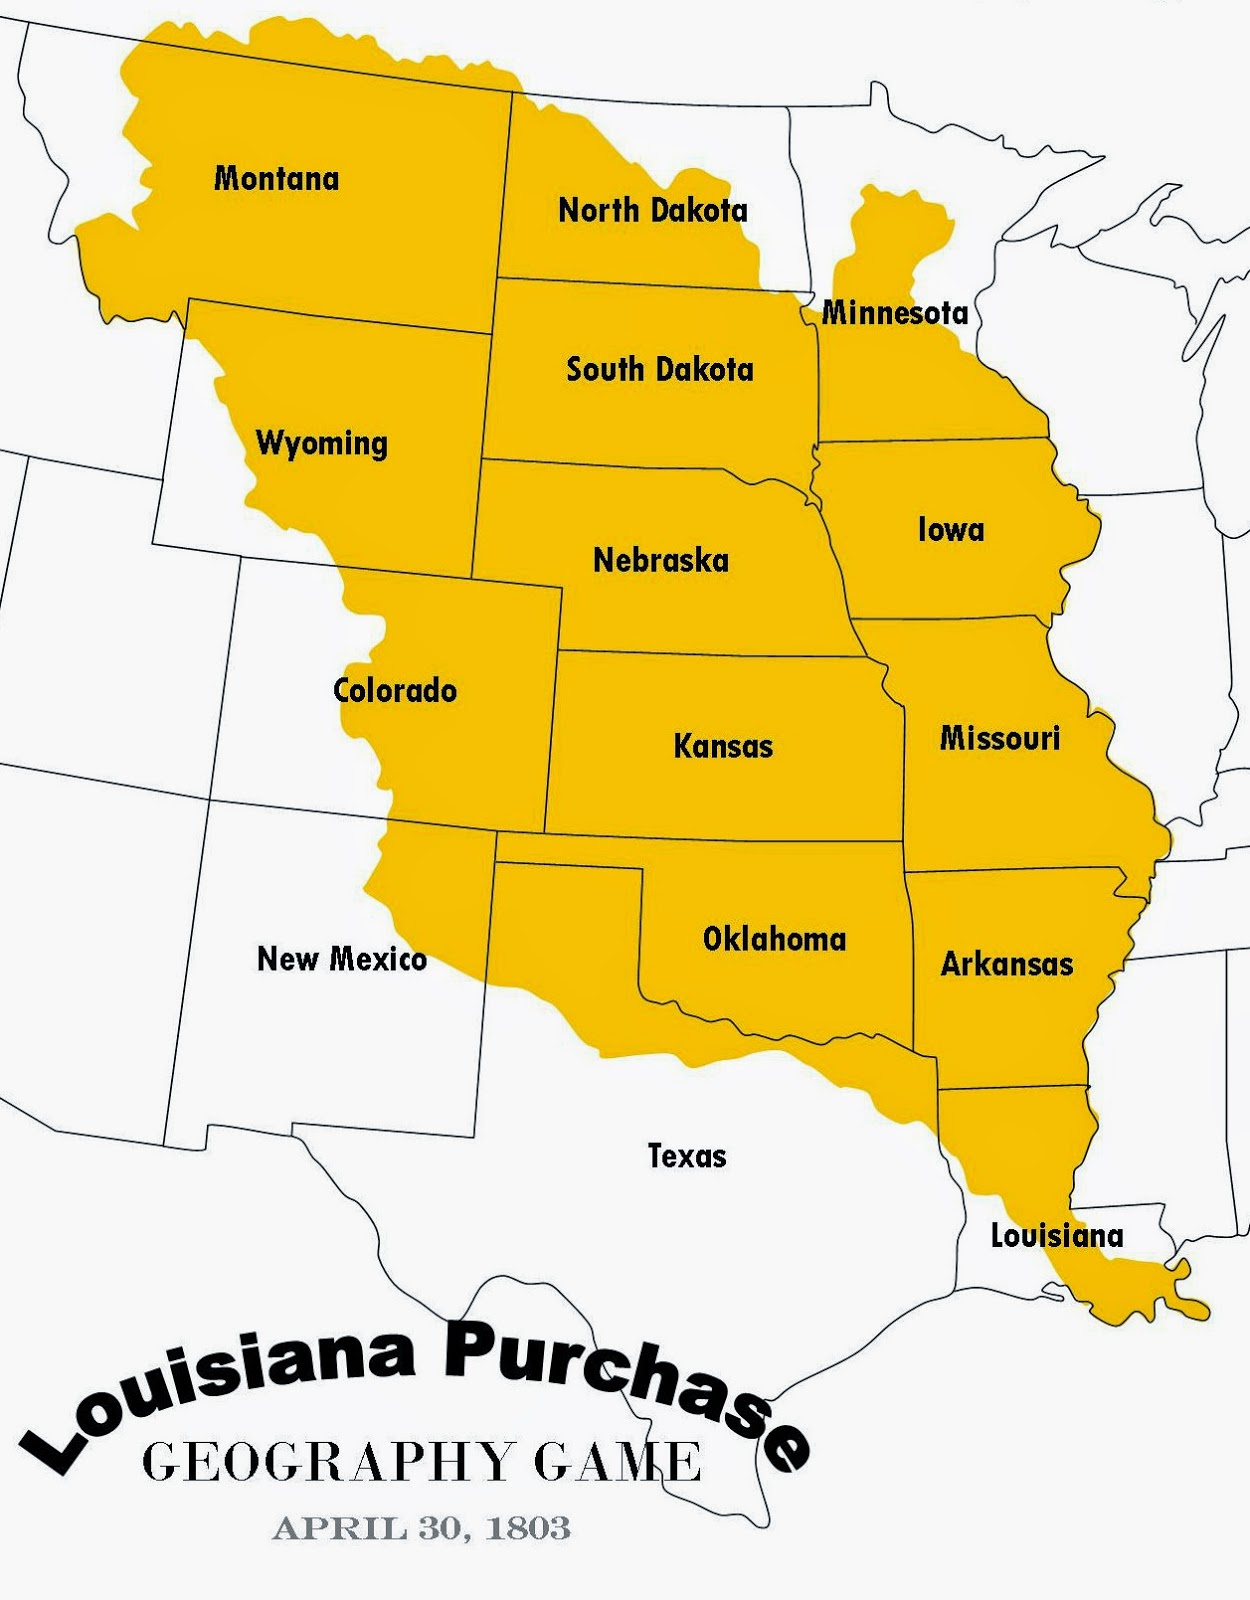 Relentlessly Fun, Deceptively Educational: Louisiana Purchase Geography Game